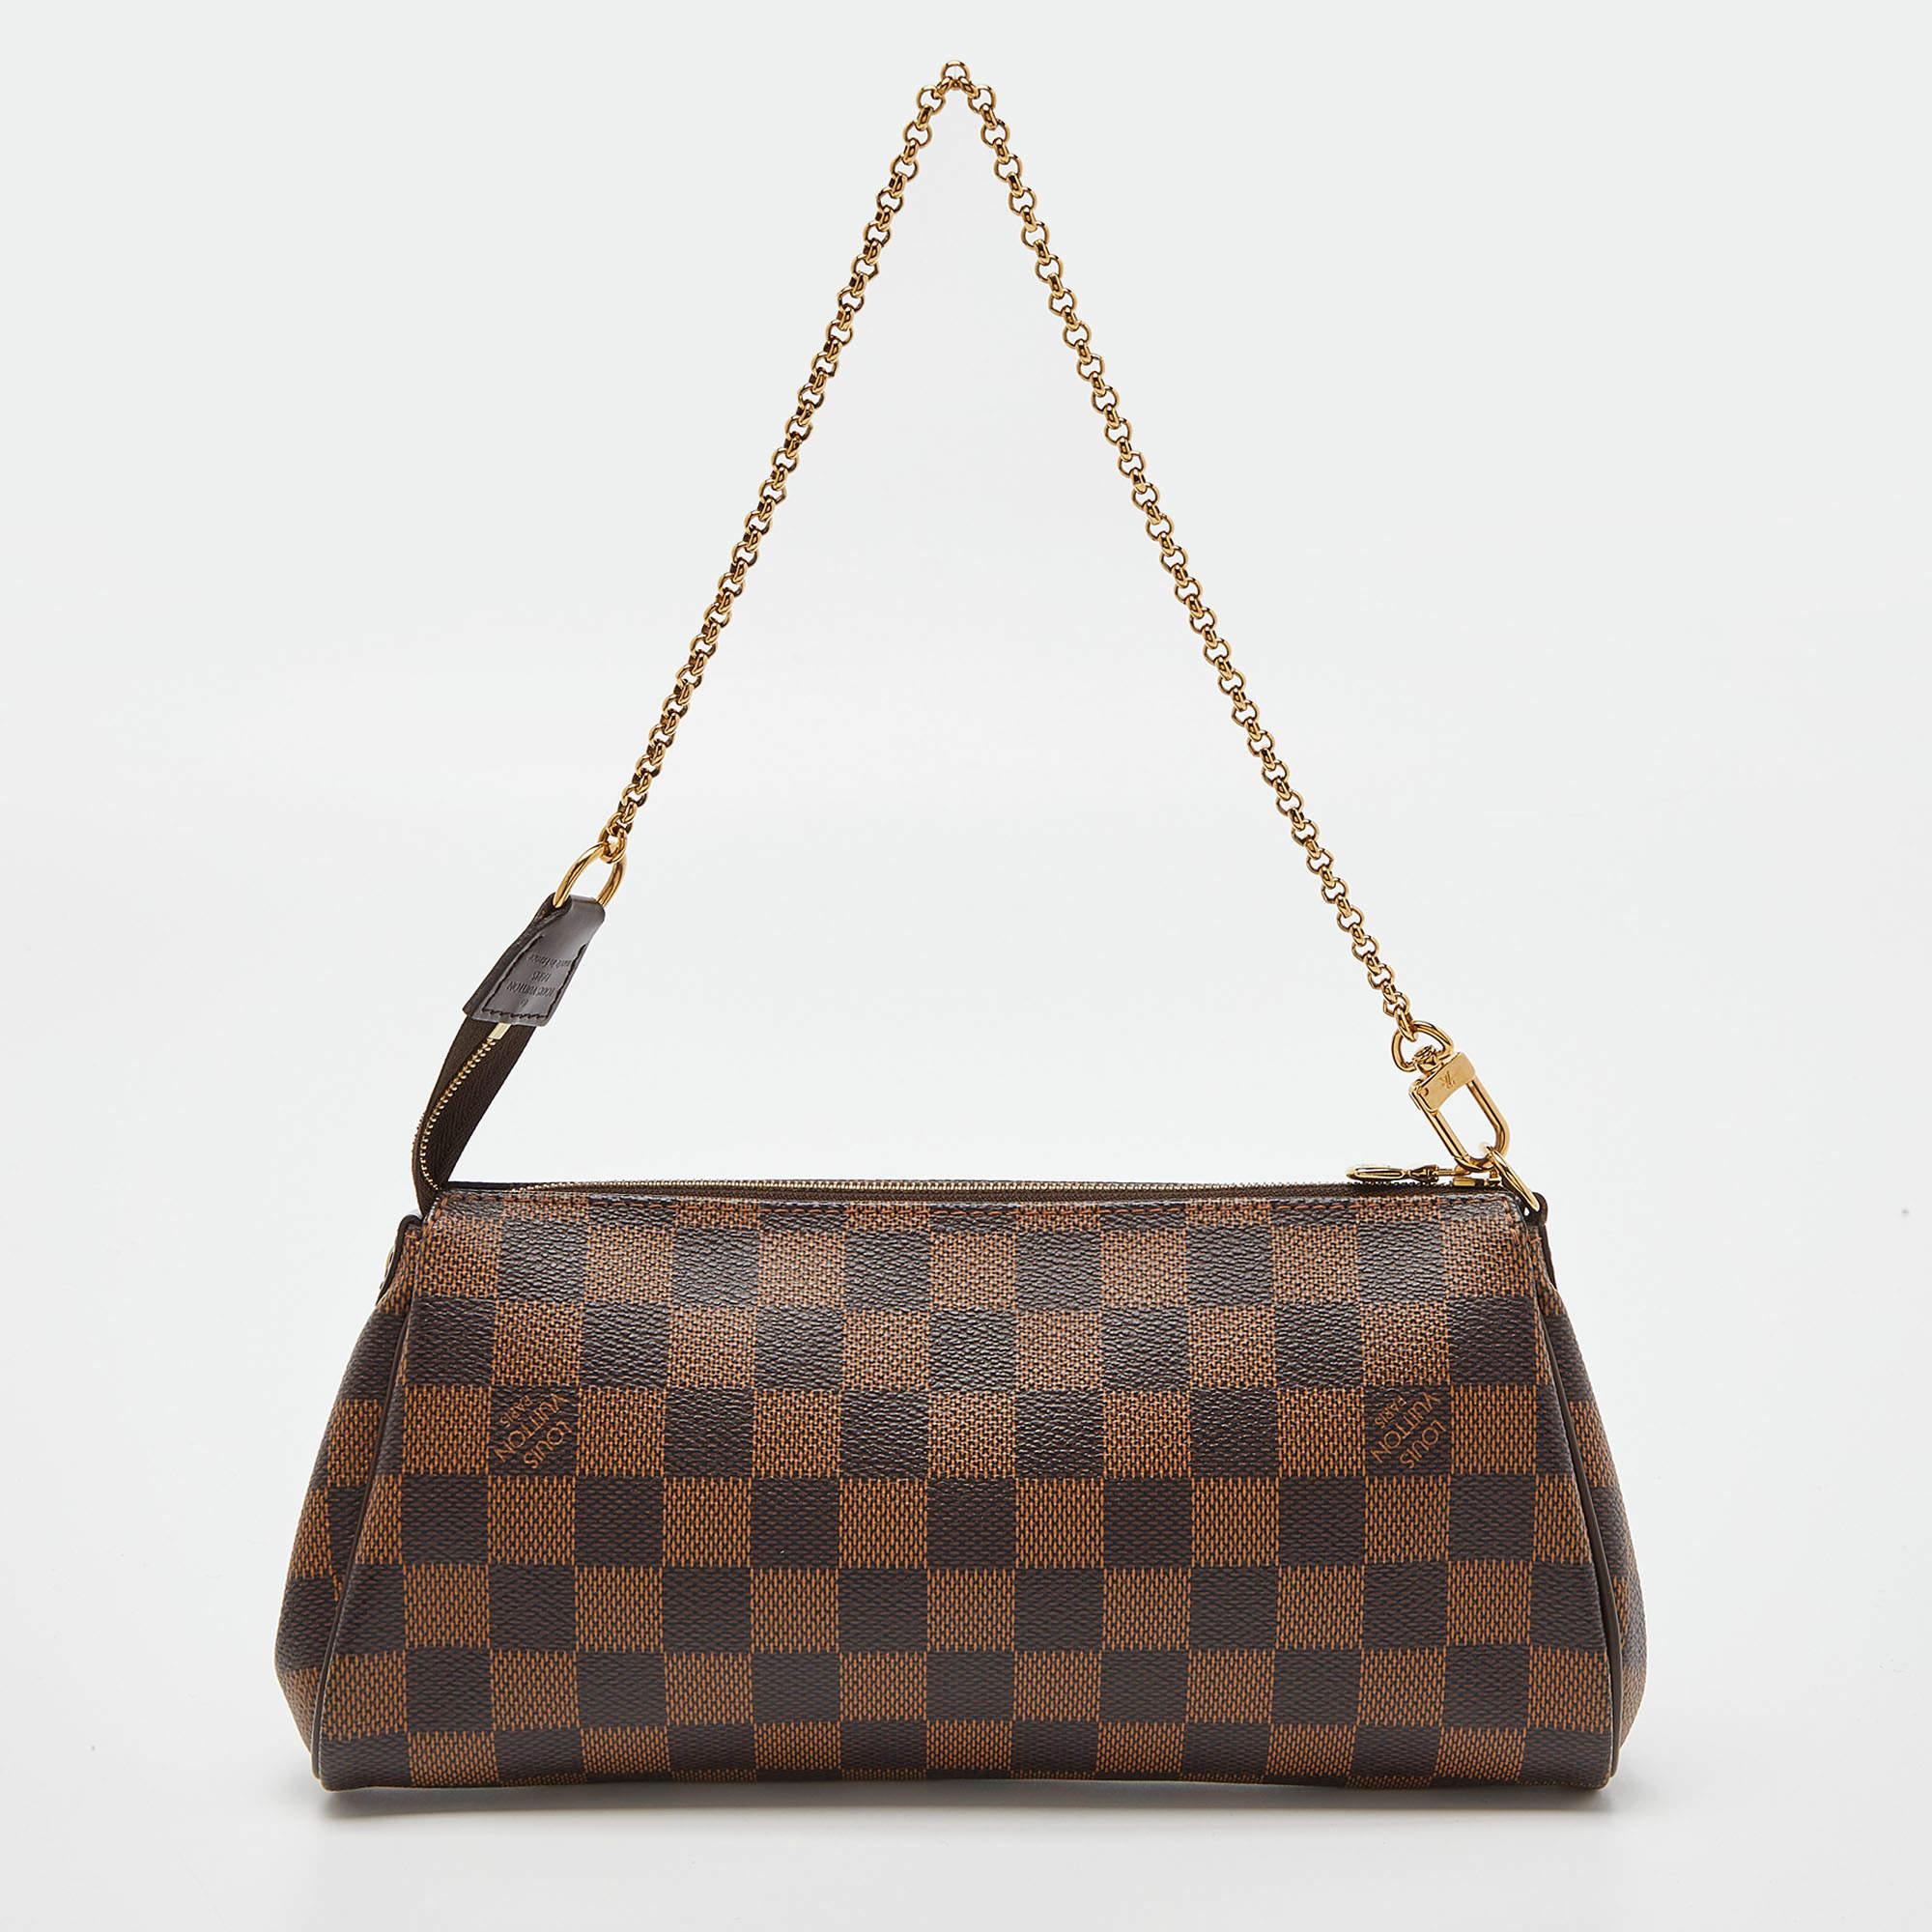 The Eva Pochette bag by Louis Vuitton showcases contemporary charm with its sophisticated shape. Made in France from Damier Ebene canvas, it features a detachable gold-tone chain handle and a top zipper. The metal plate engraved with the label's